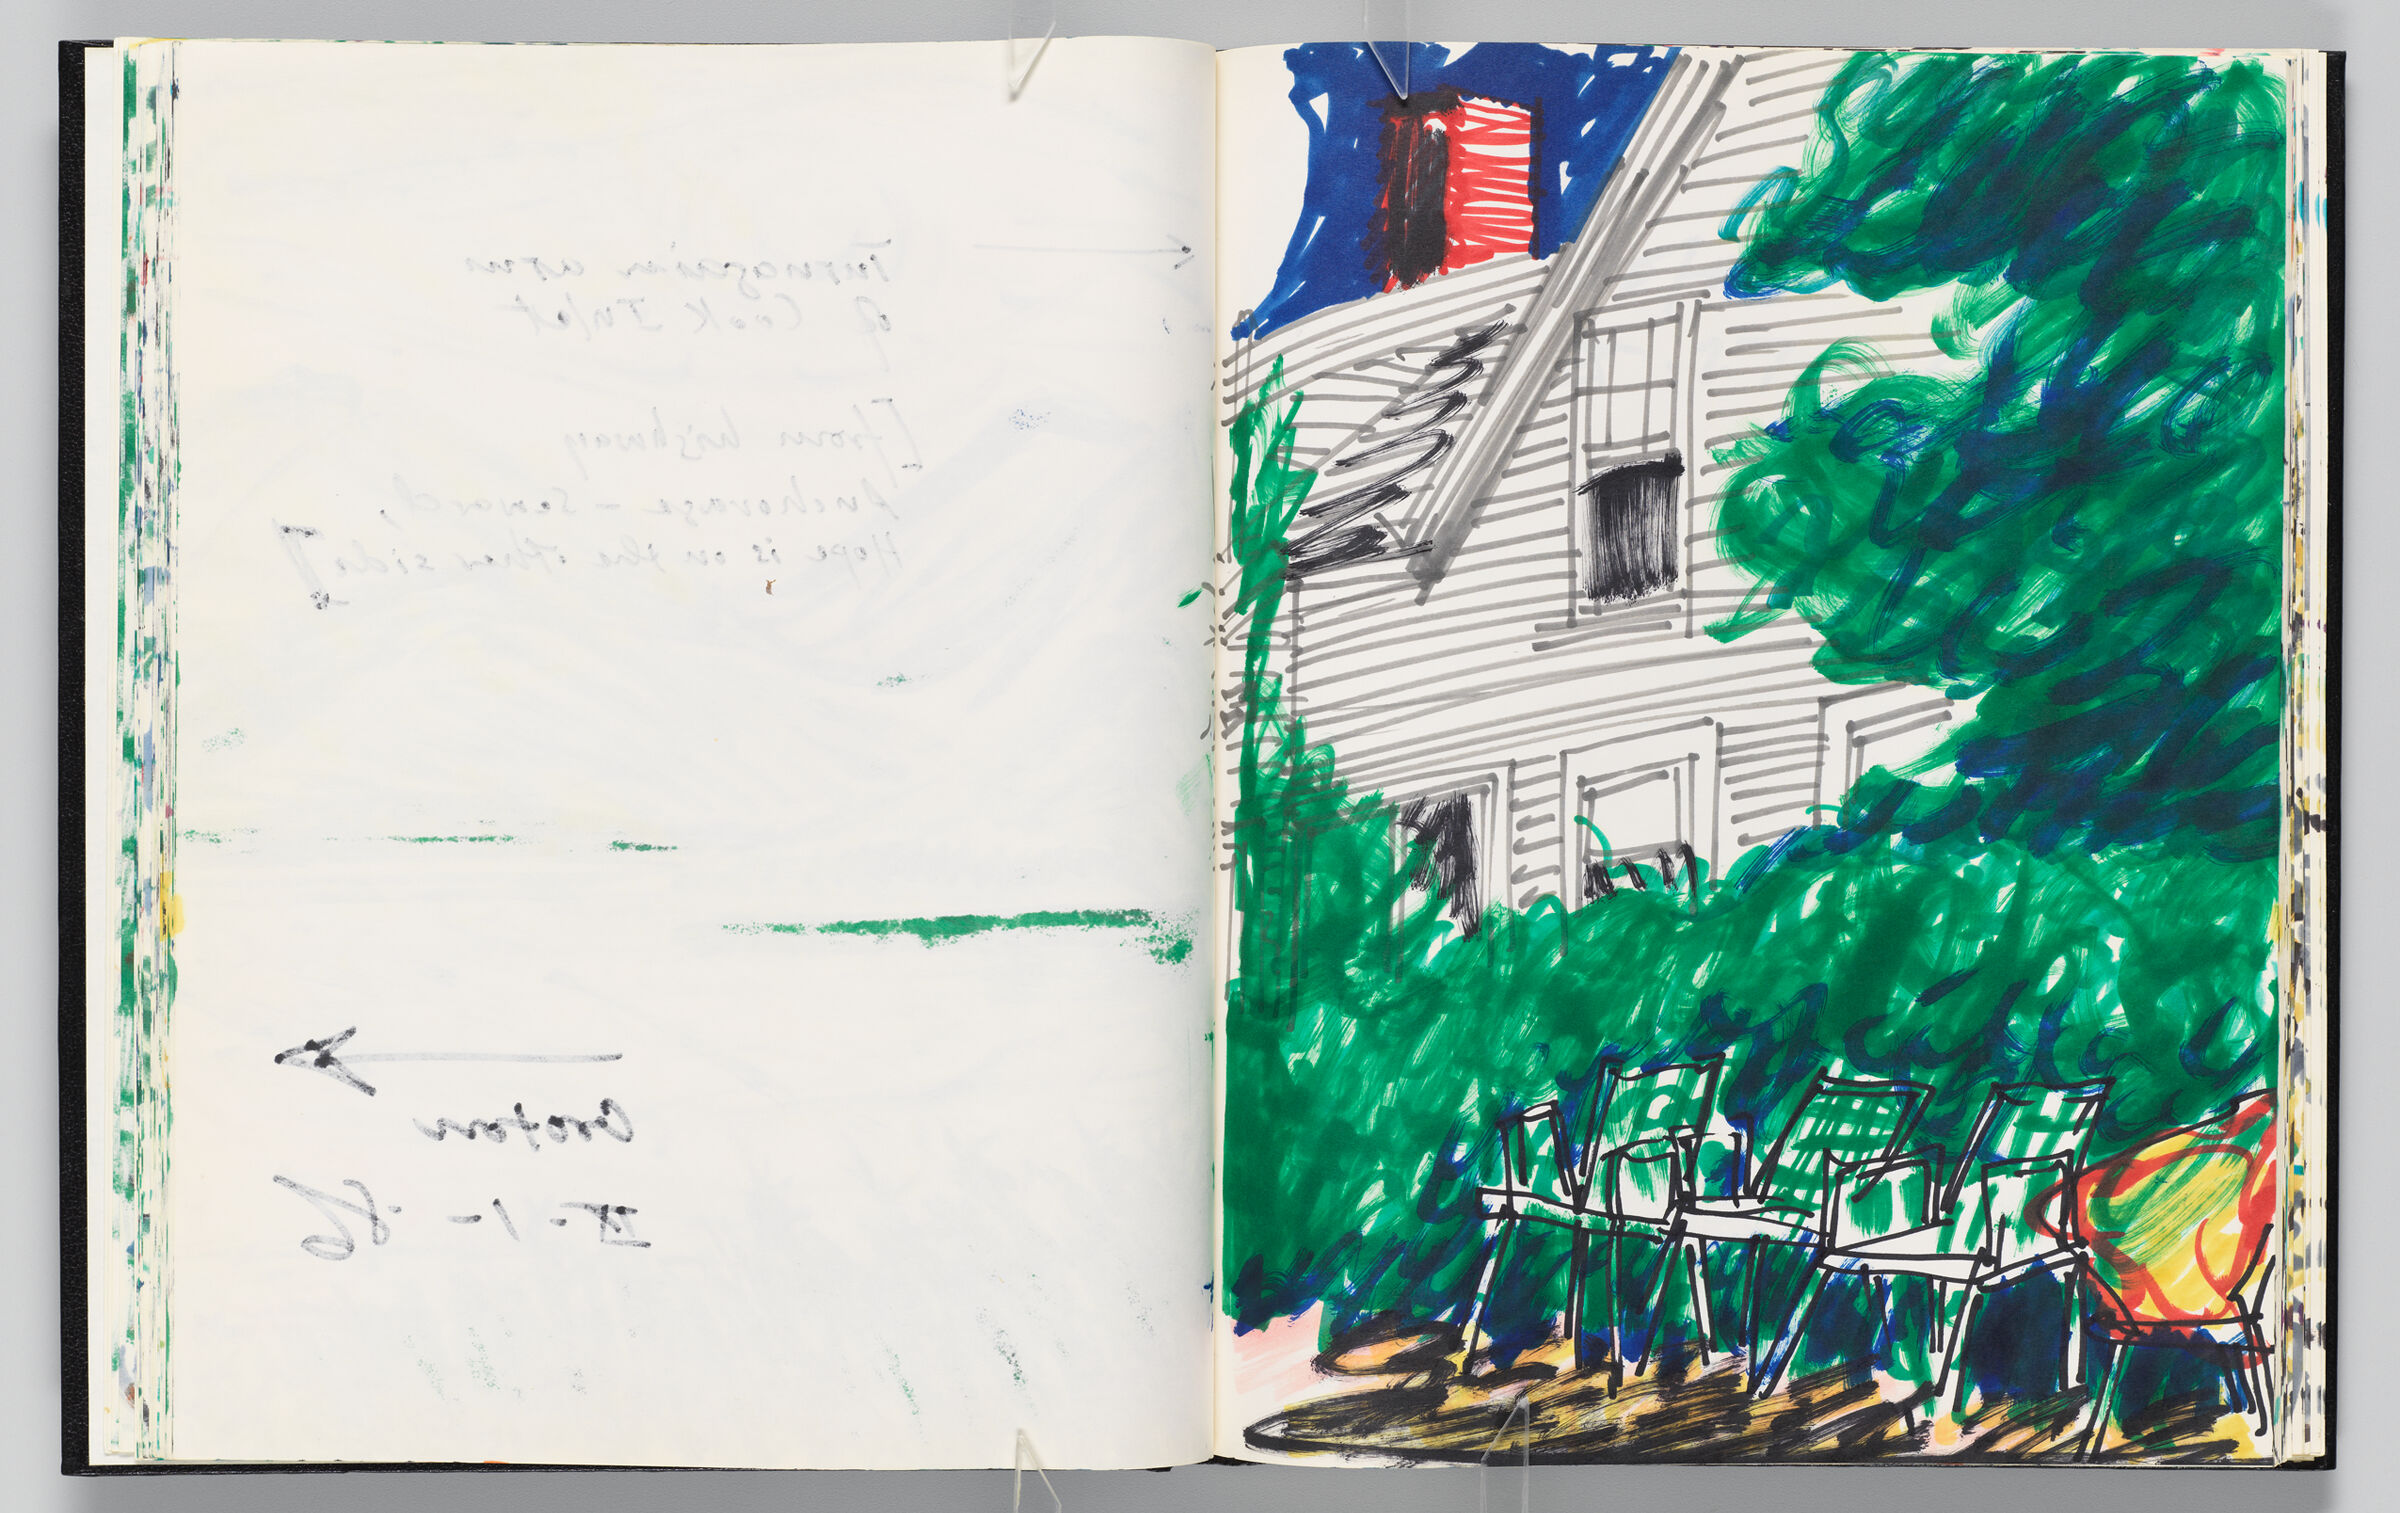 Untitled (Bleed-Through Of Previous Page, Left Page); Untitled (Groton Landscape With Home, Right Page)